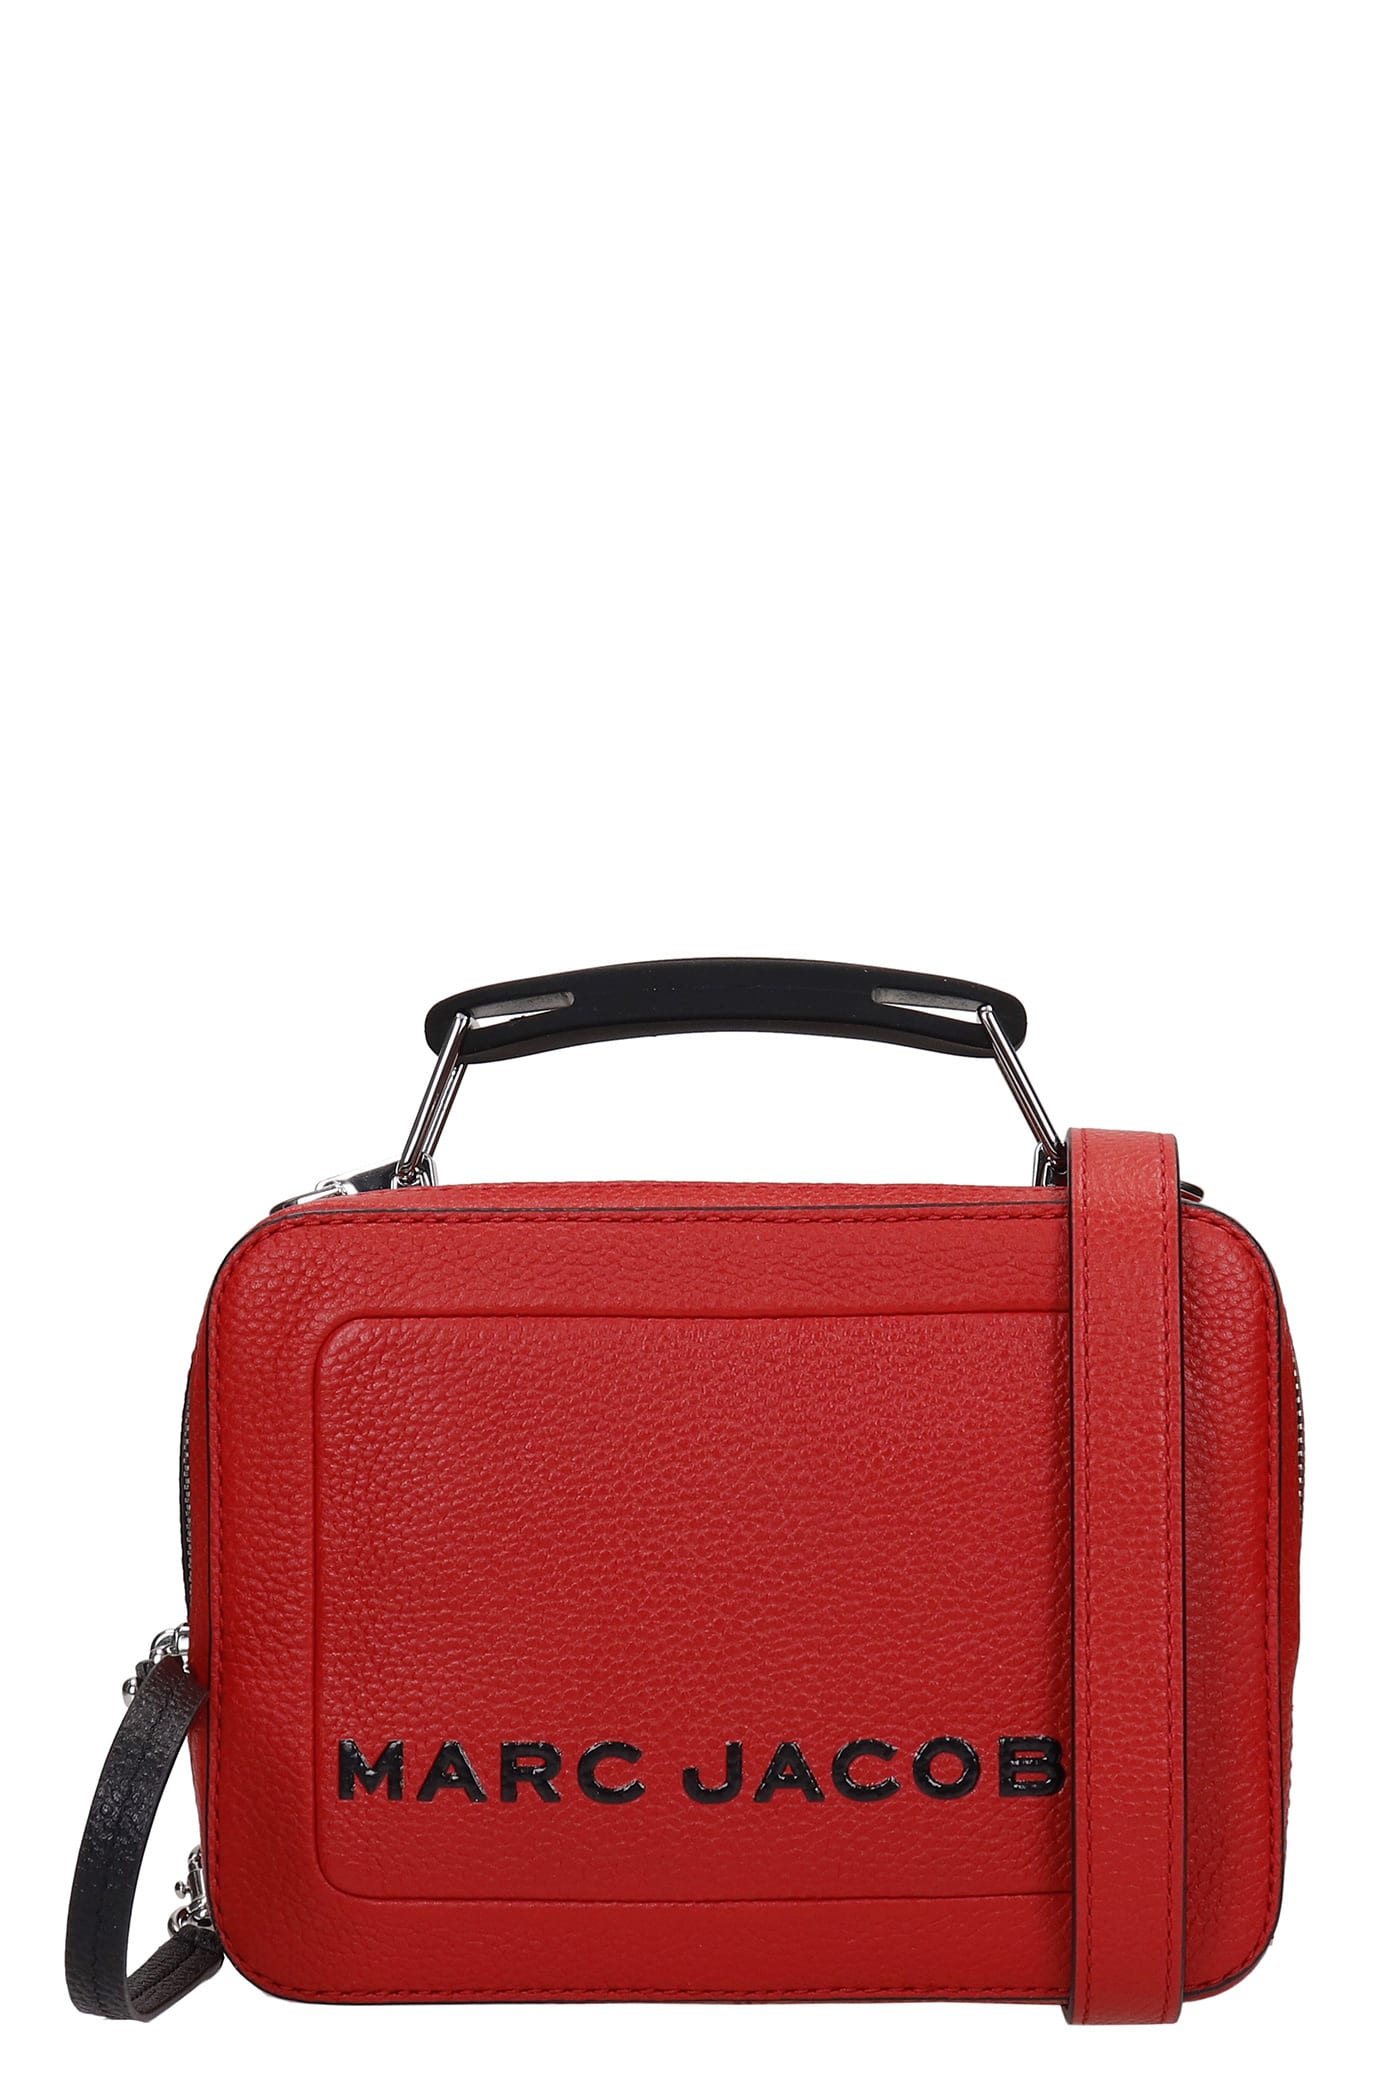 Marc Jacobs The Box 20 Hand Bag In Red Leather